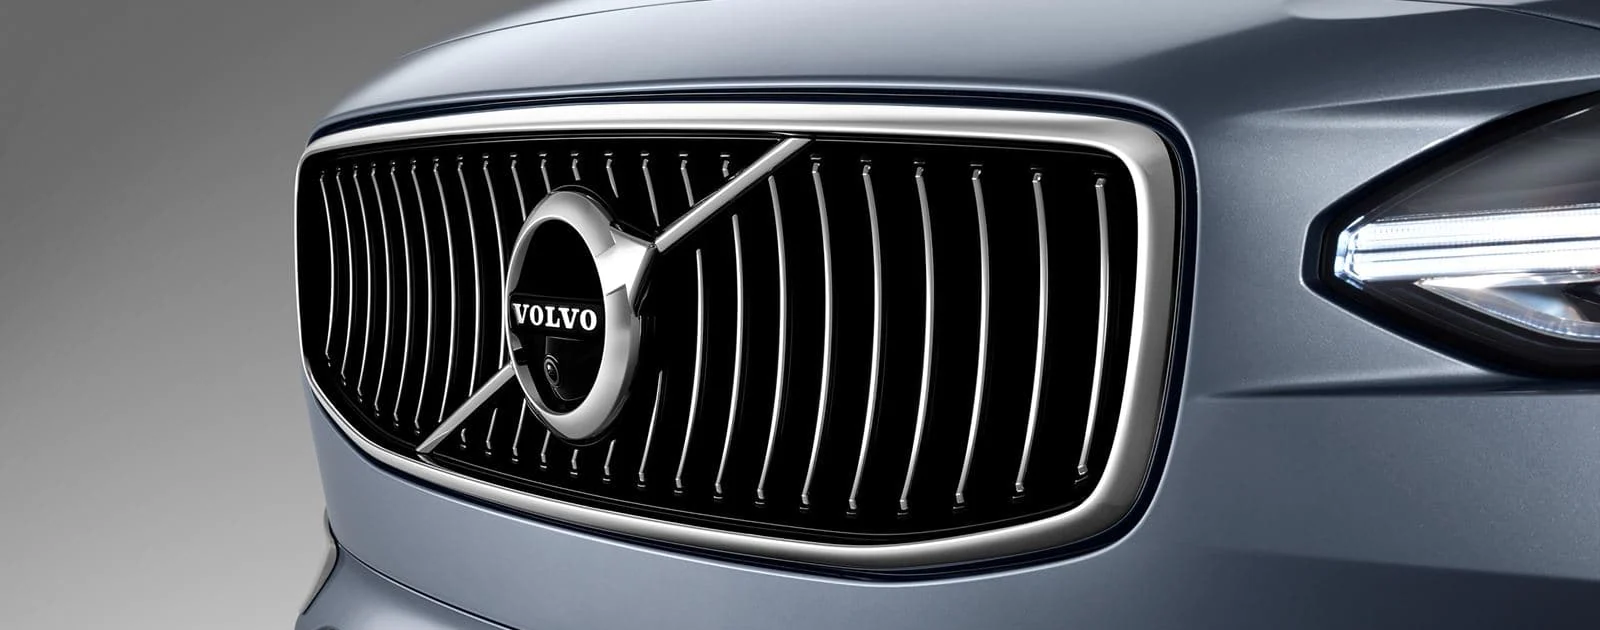 front of a Volvo Car